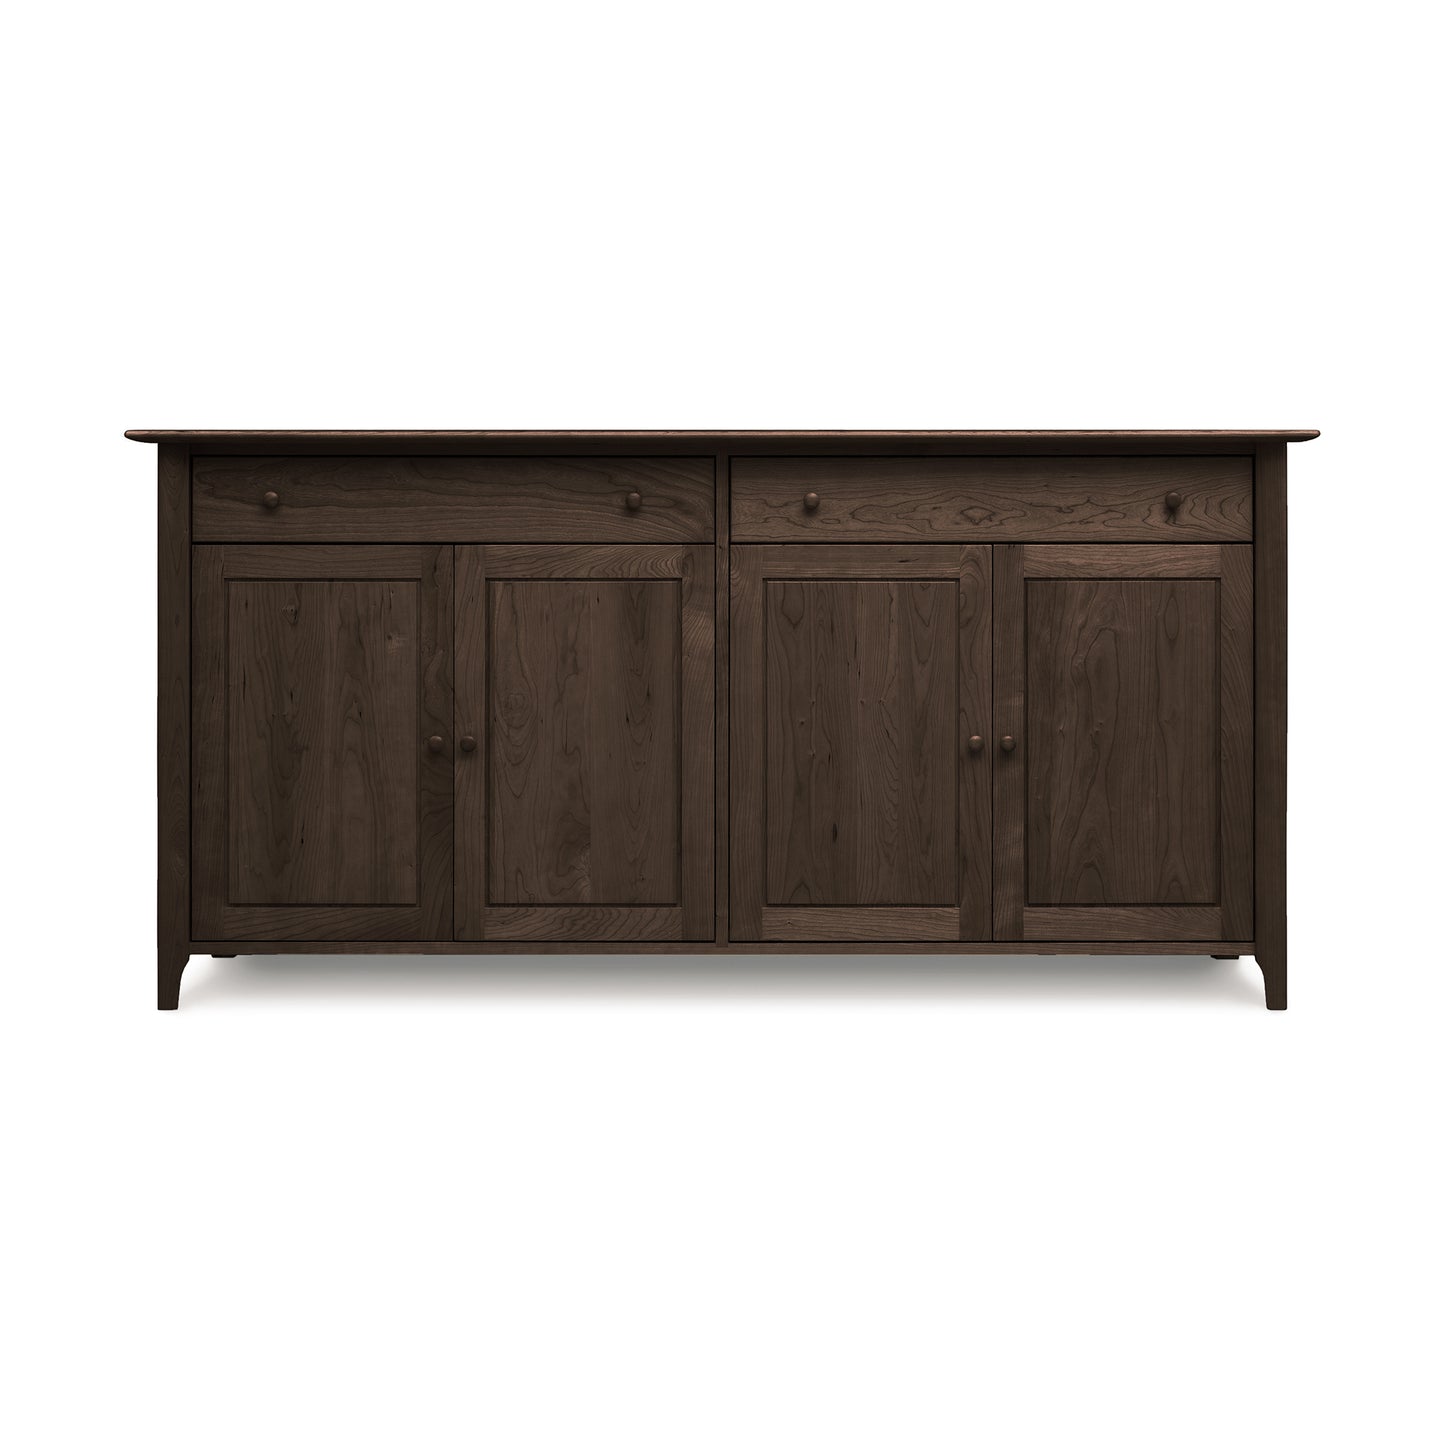 A luxury Copeland Furniture Sarah 2-Drawer, 4-Door Buffet, isolated on a white background.